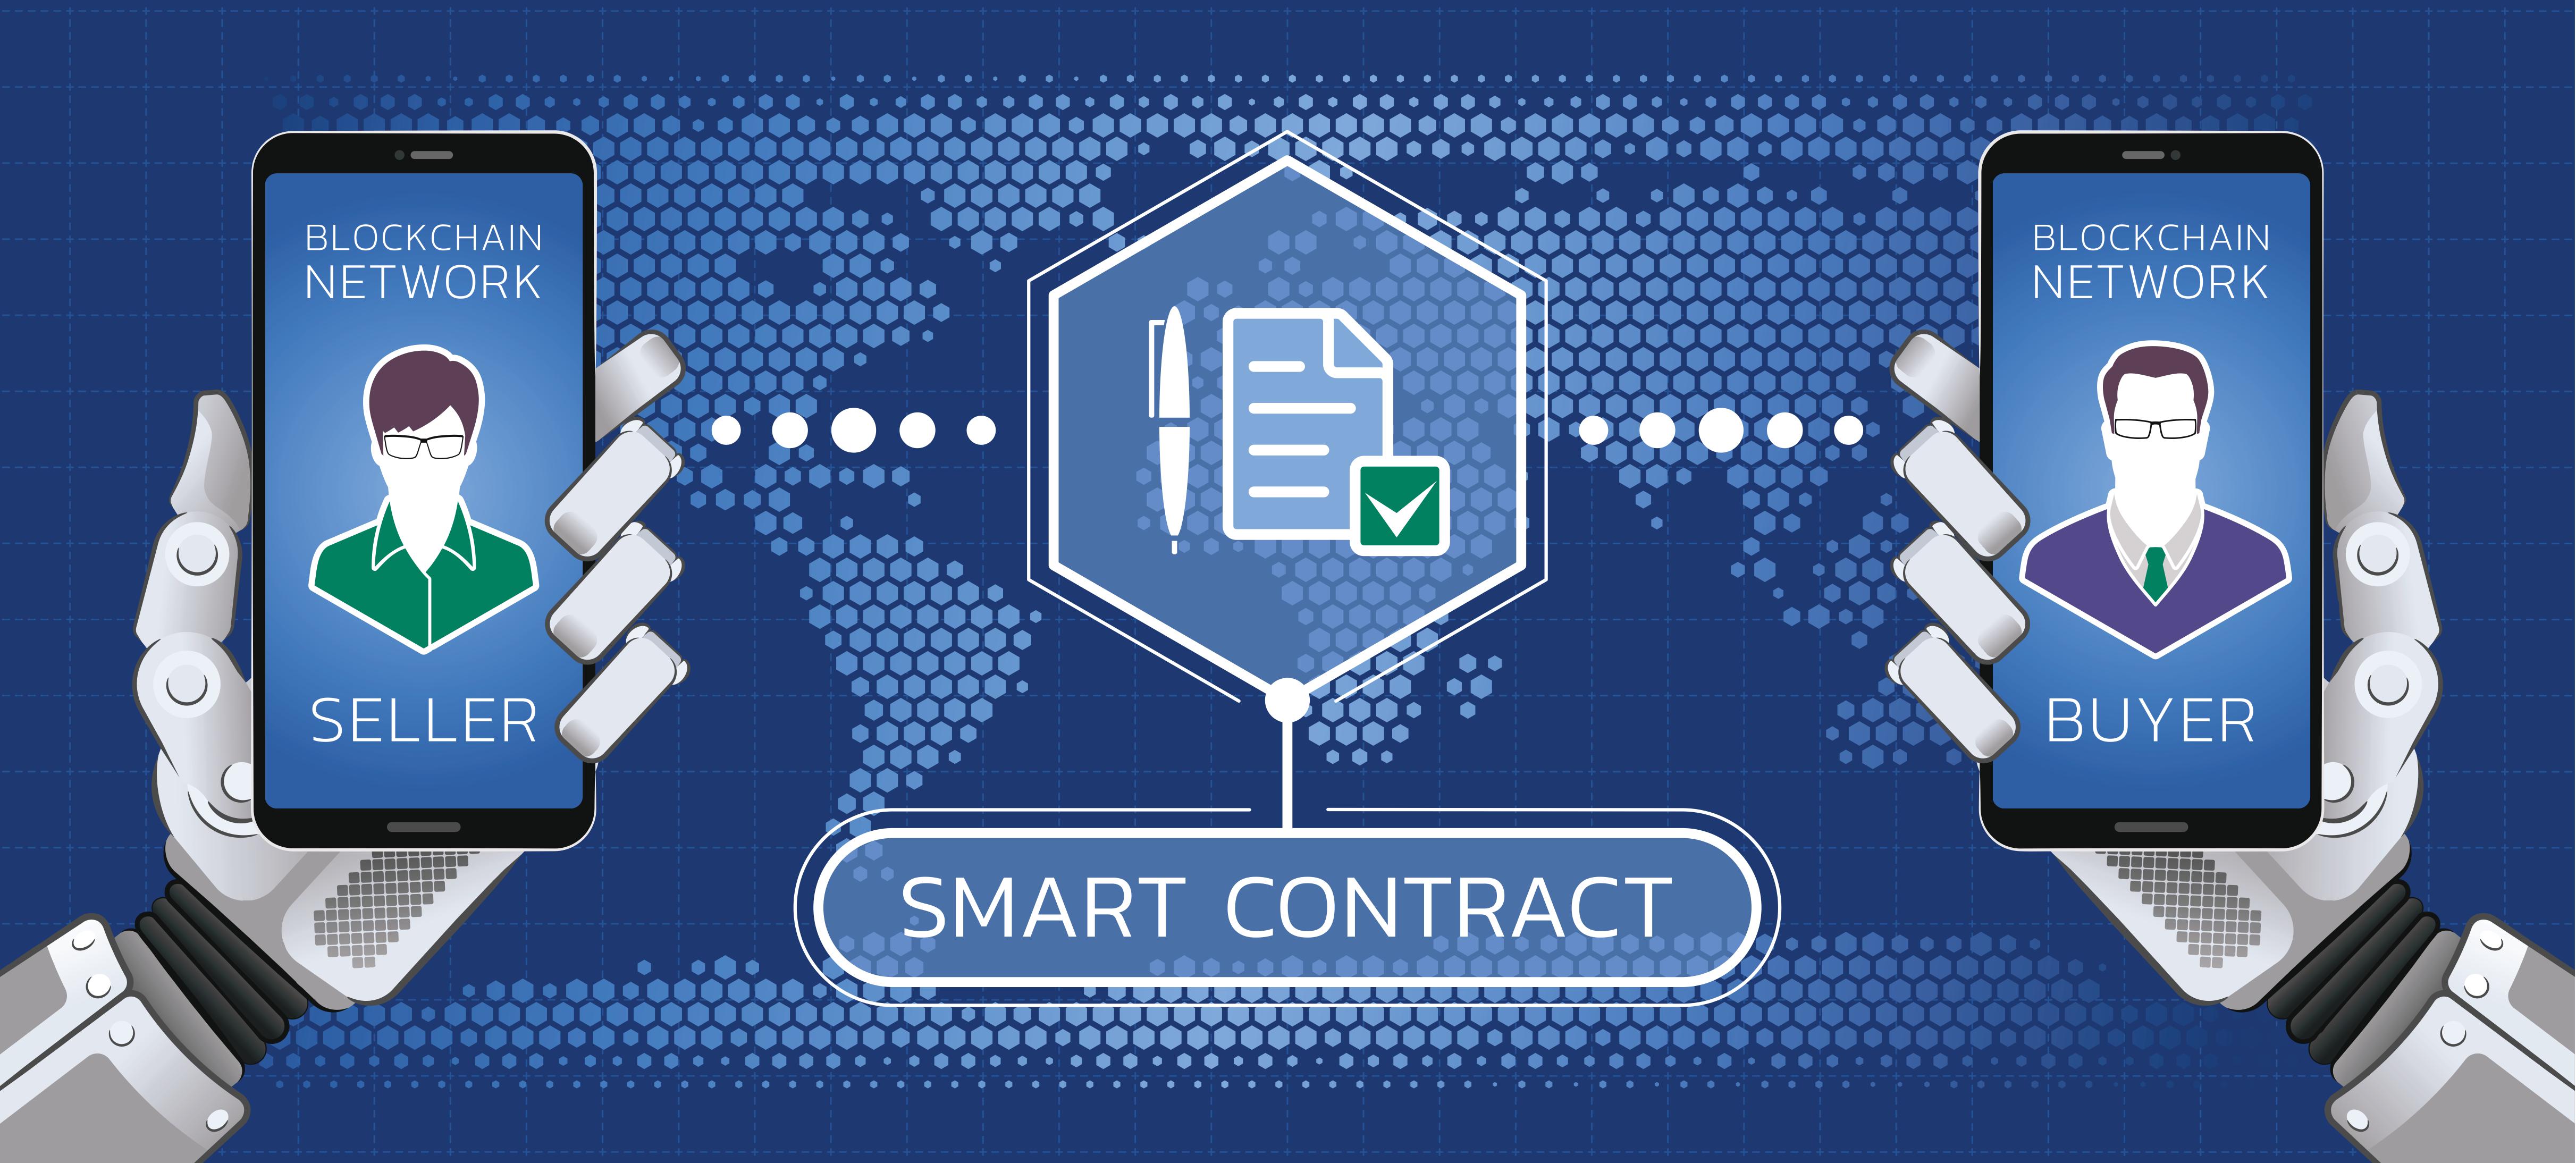 blockchain smart contracts construction industry